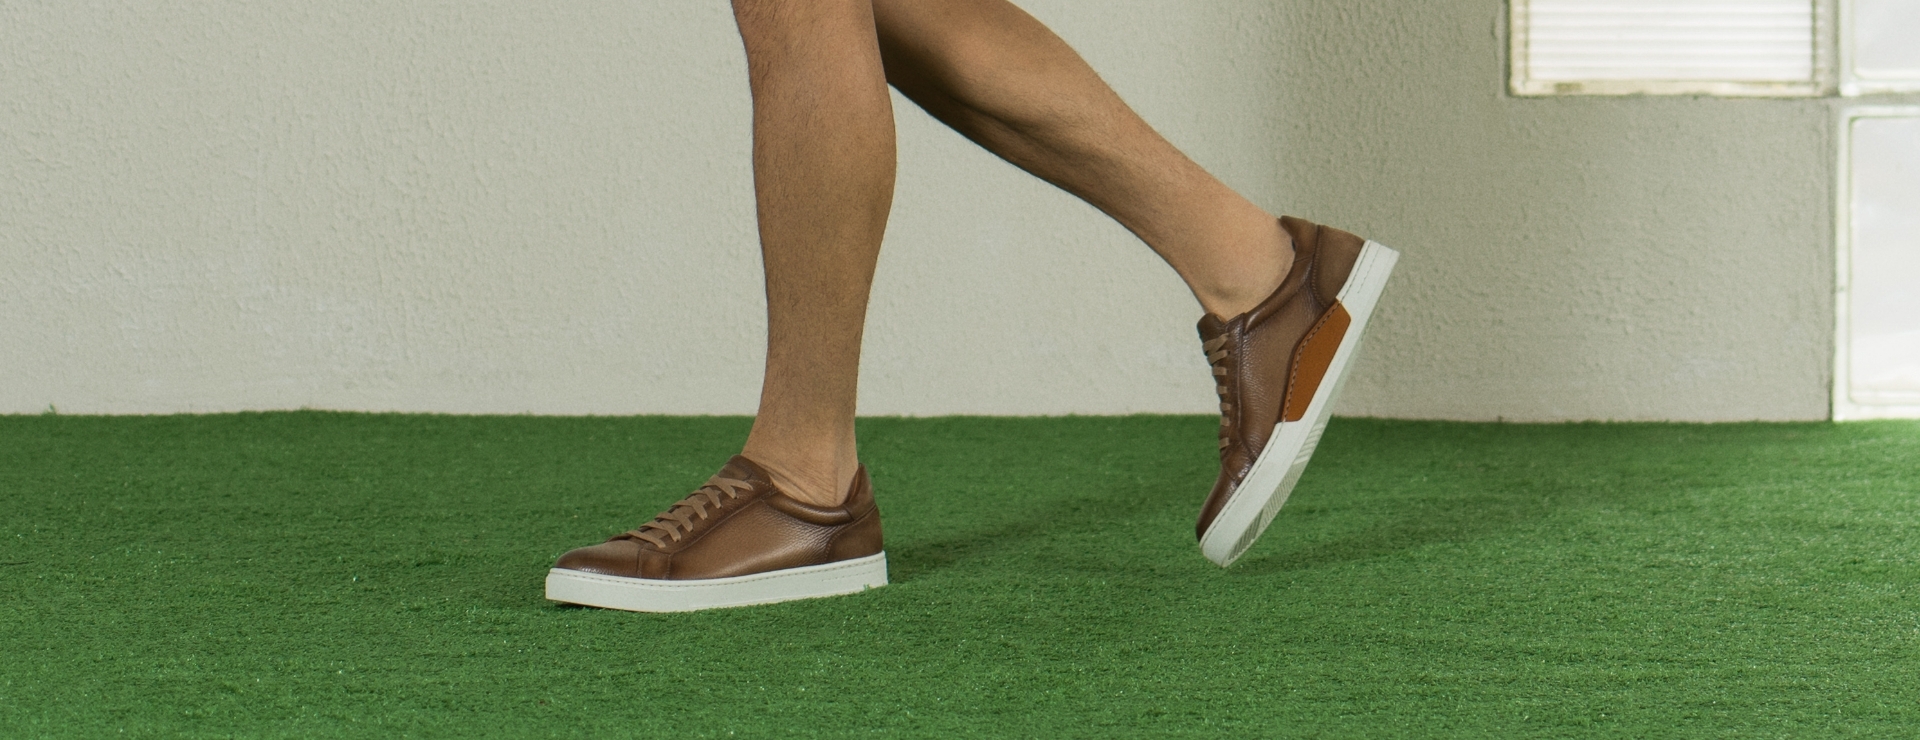 A woman steps takes a step on turf while wearing Magnanni Theresa sneakers.